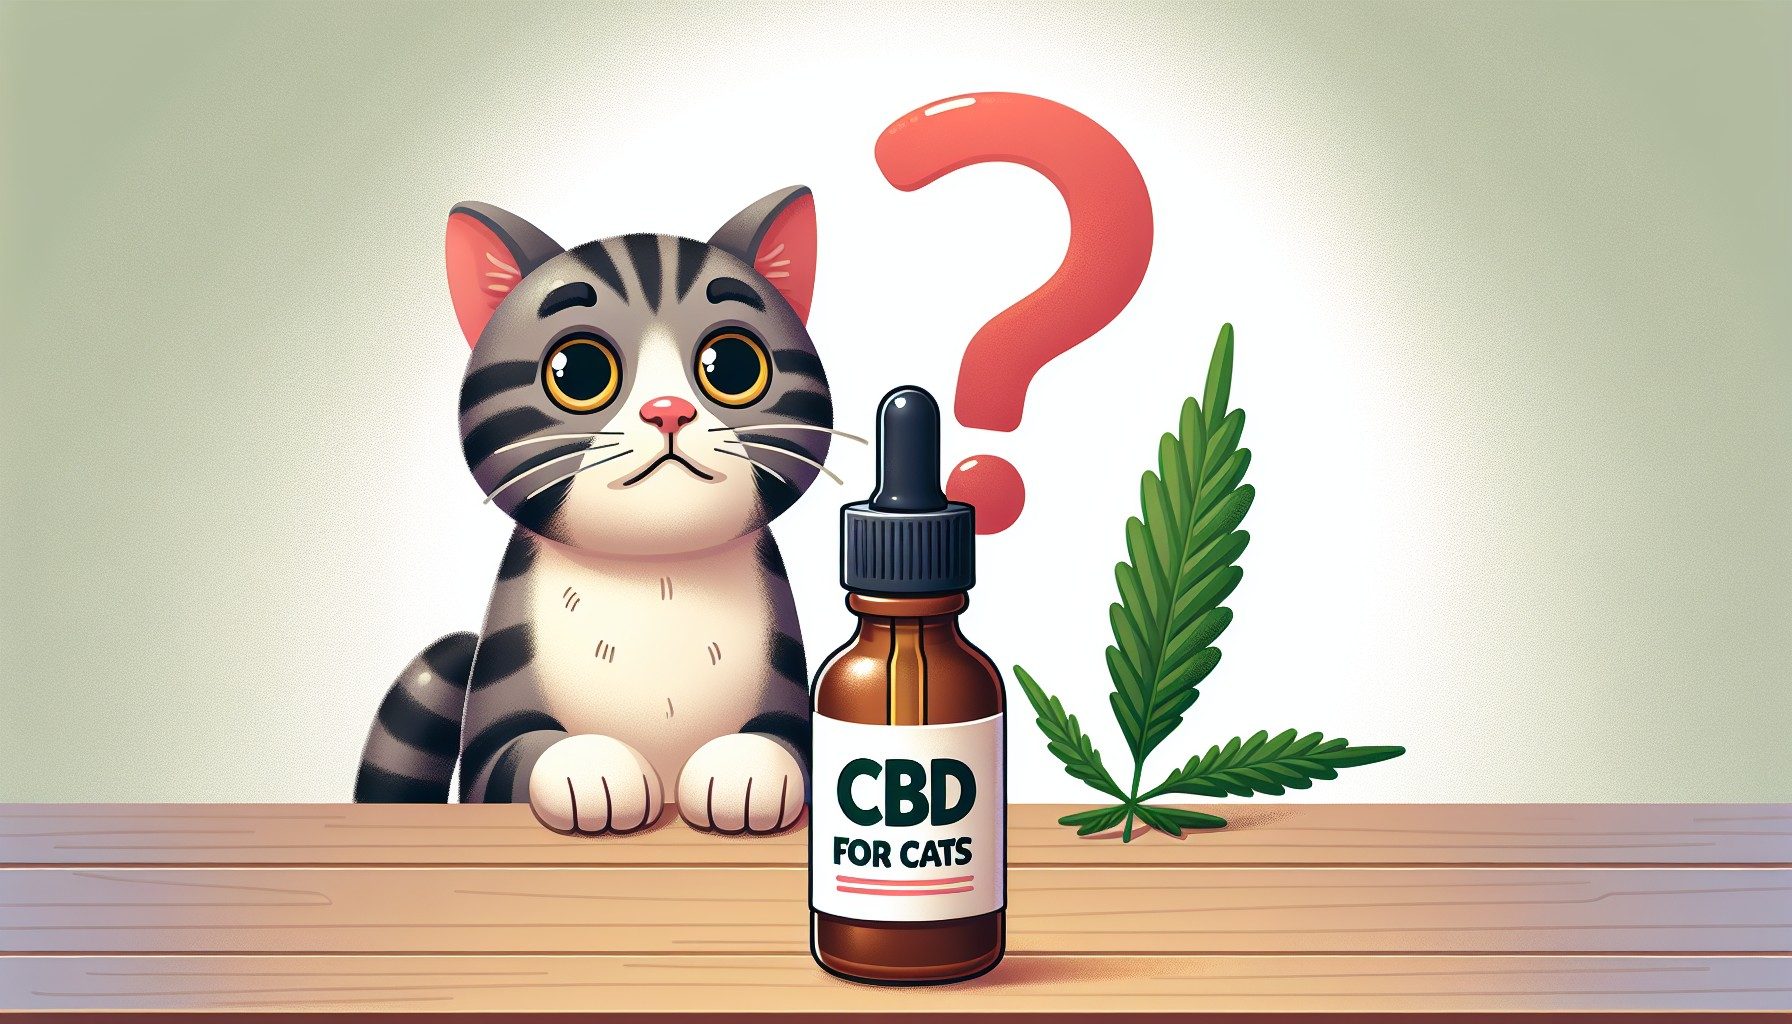 CBD oil for cats: can we give them cannabidiol?